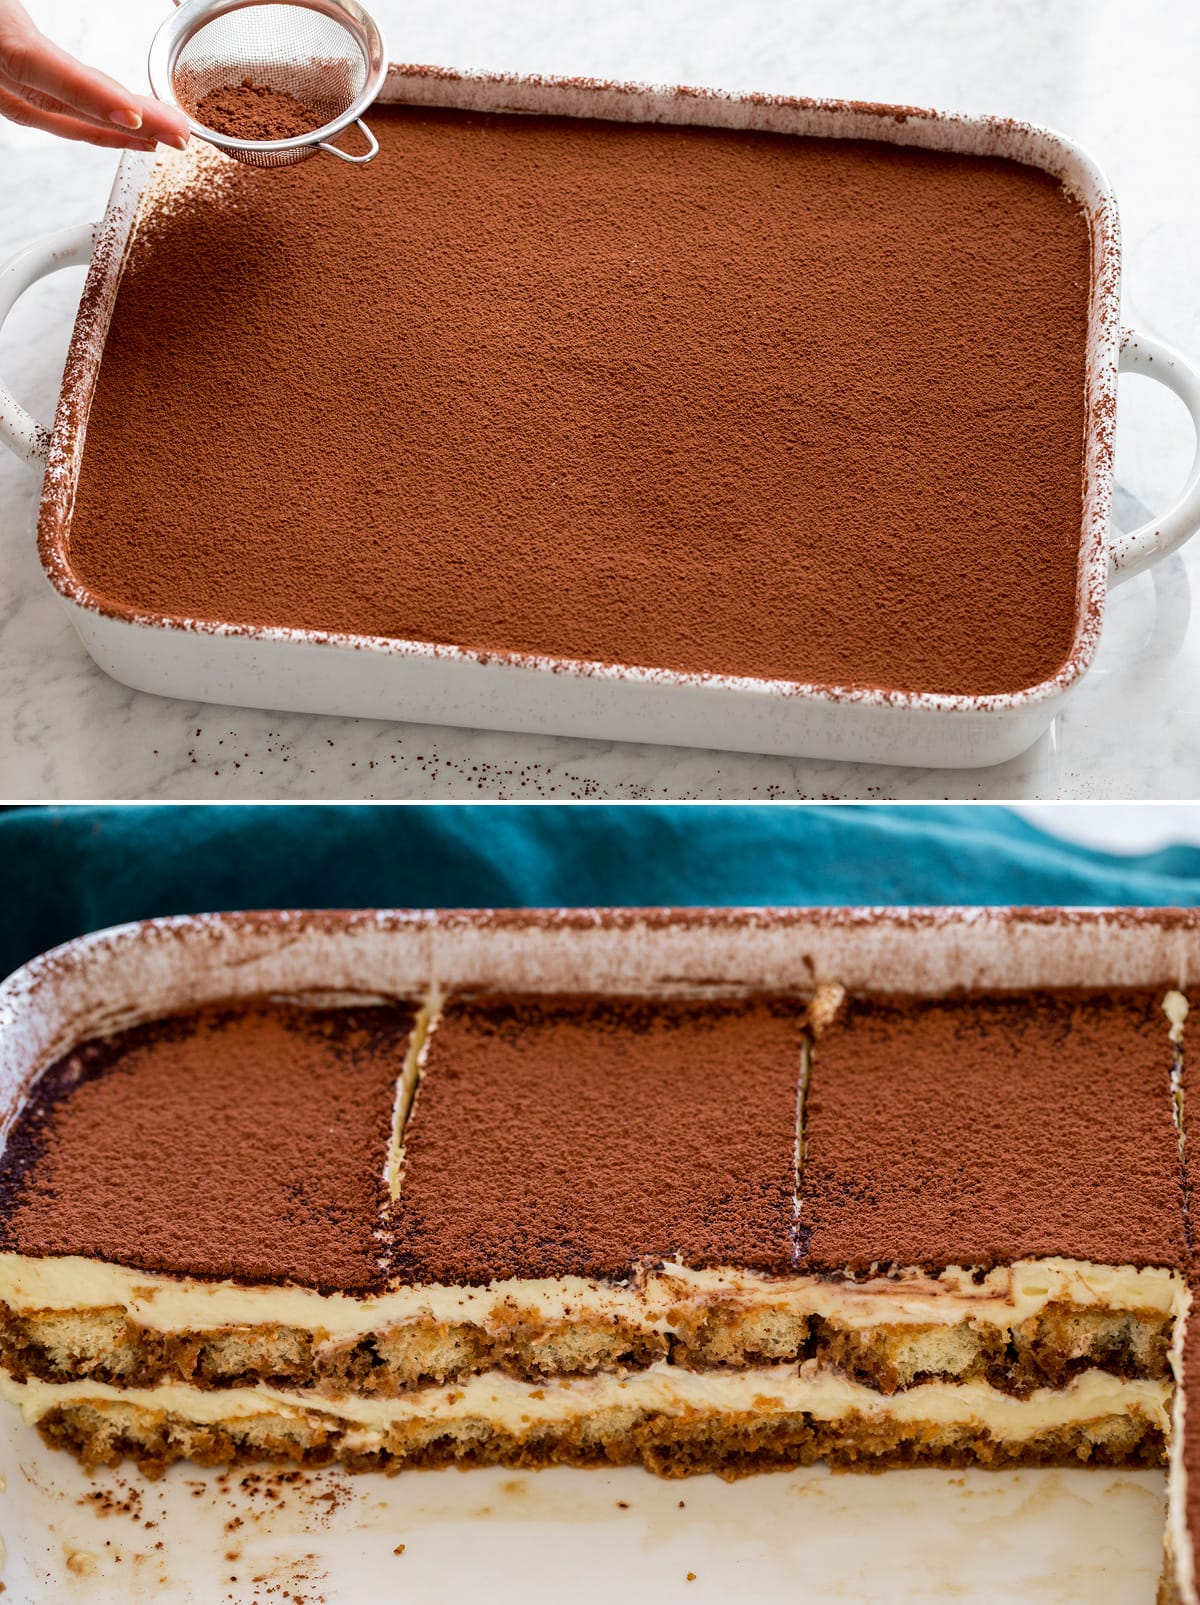 Finished tiramisu in a baking dish sliced into showing layers closely.